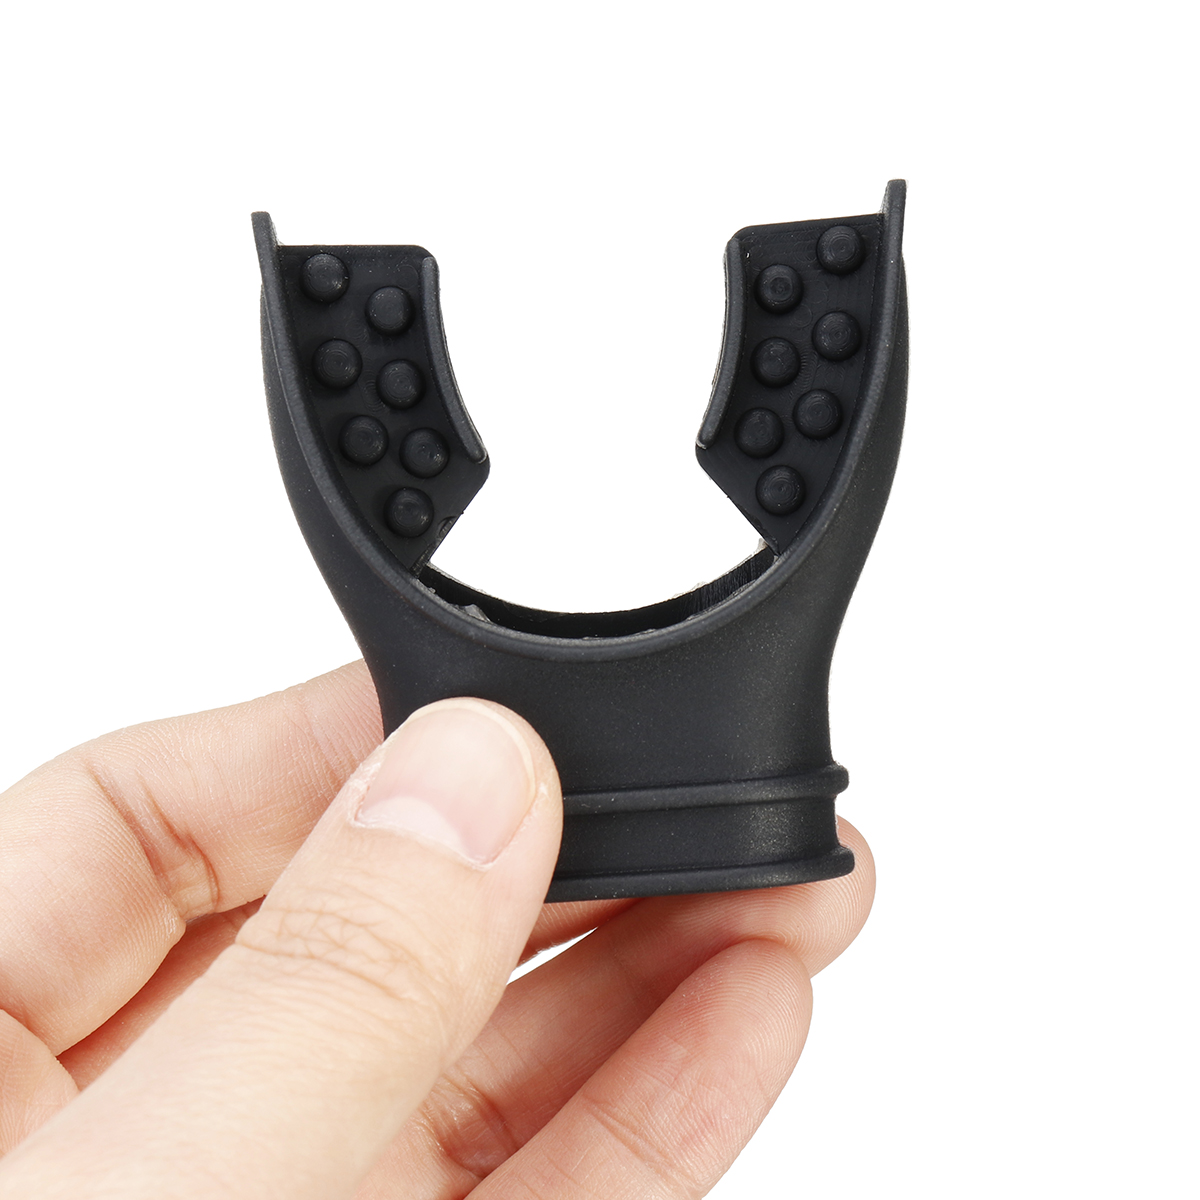 Black-Silicone-Mouthpiece-for-Portable-Oxygen-Air-Cylinder-Scuba-Air-Tank-Diving-Equipment-w-Tie-1450280